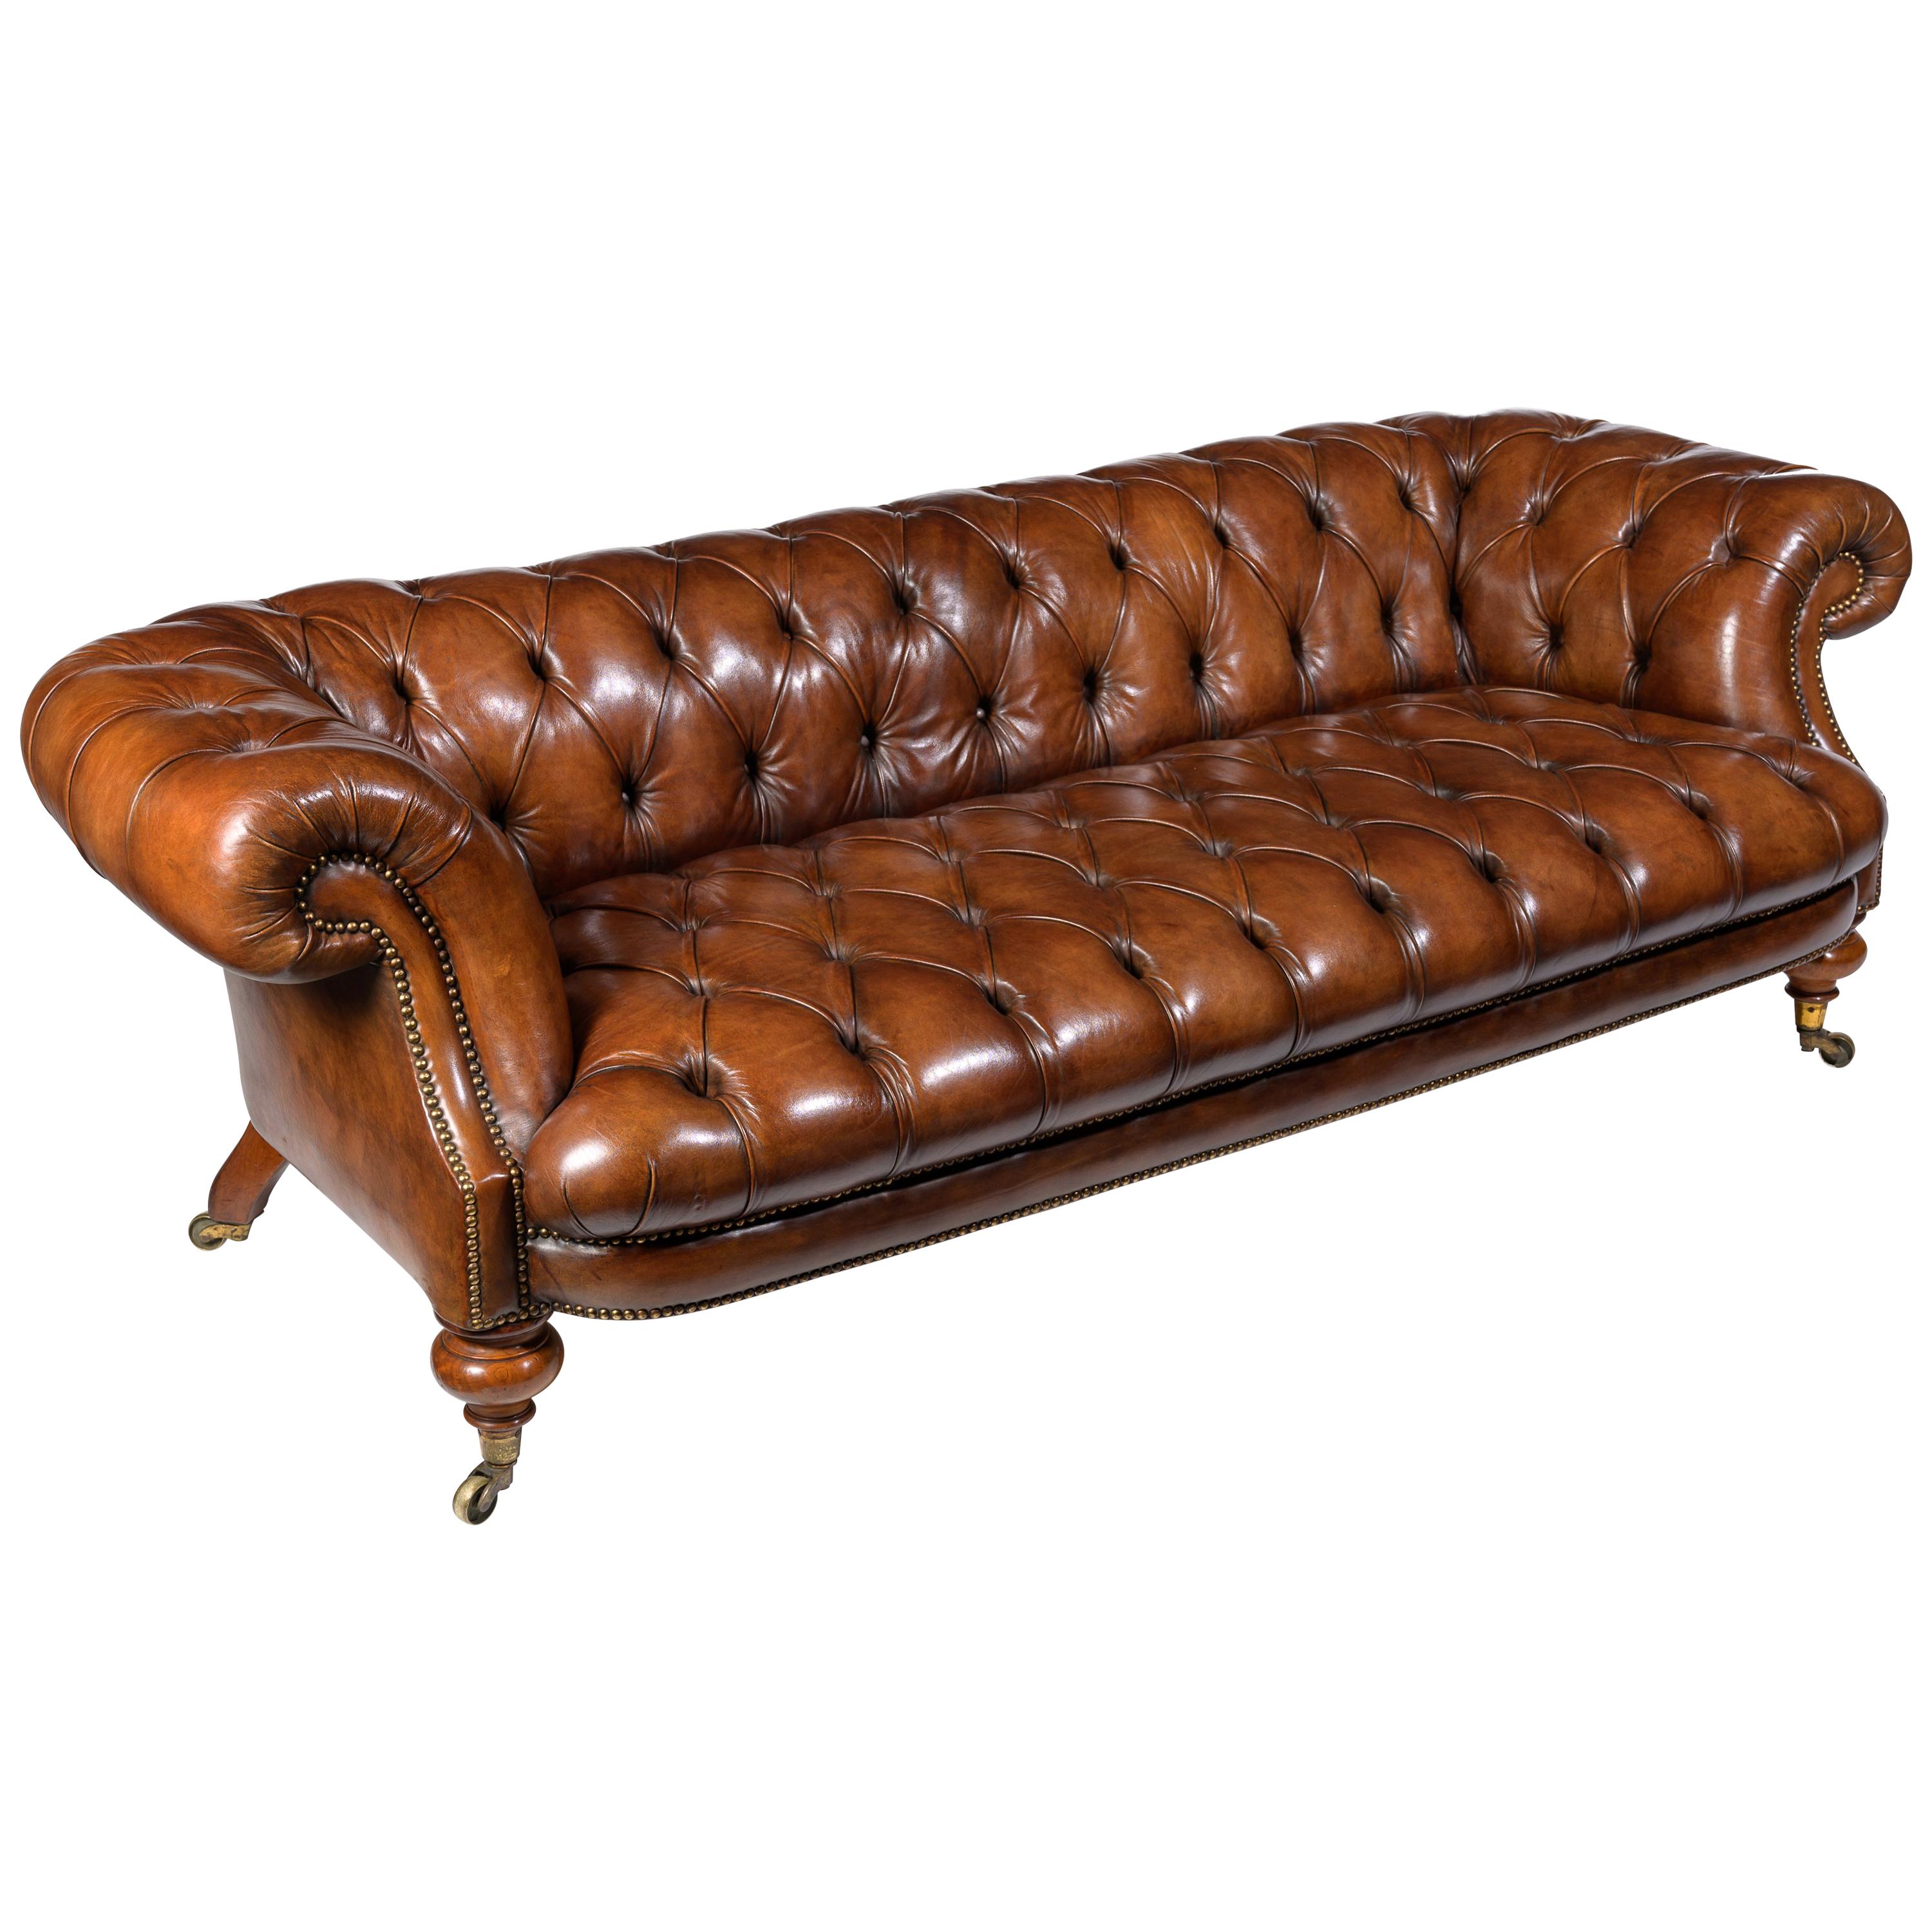 Fine 19th Century Johnstone & Jeanes Walnut Leather Upholstered Chesterfield 